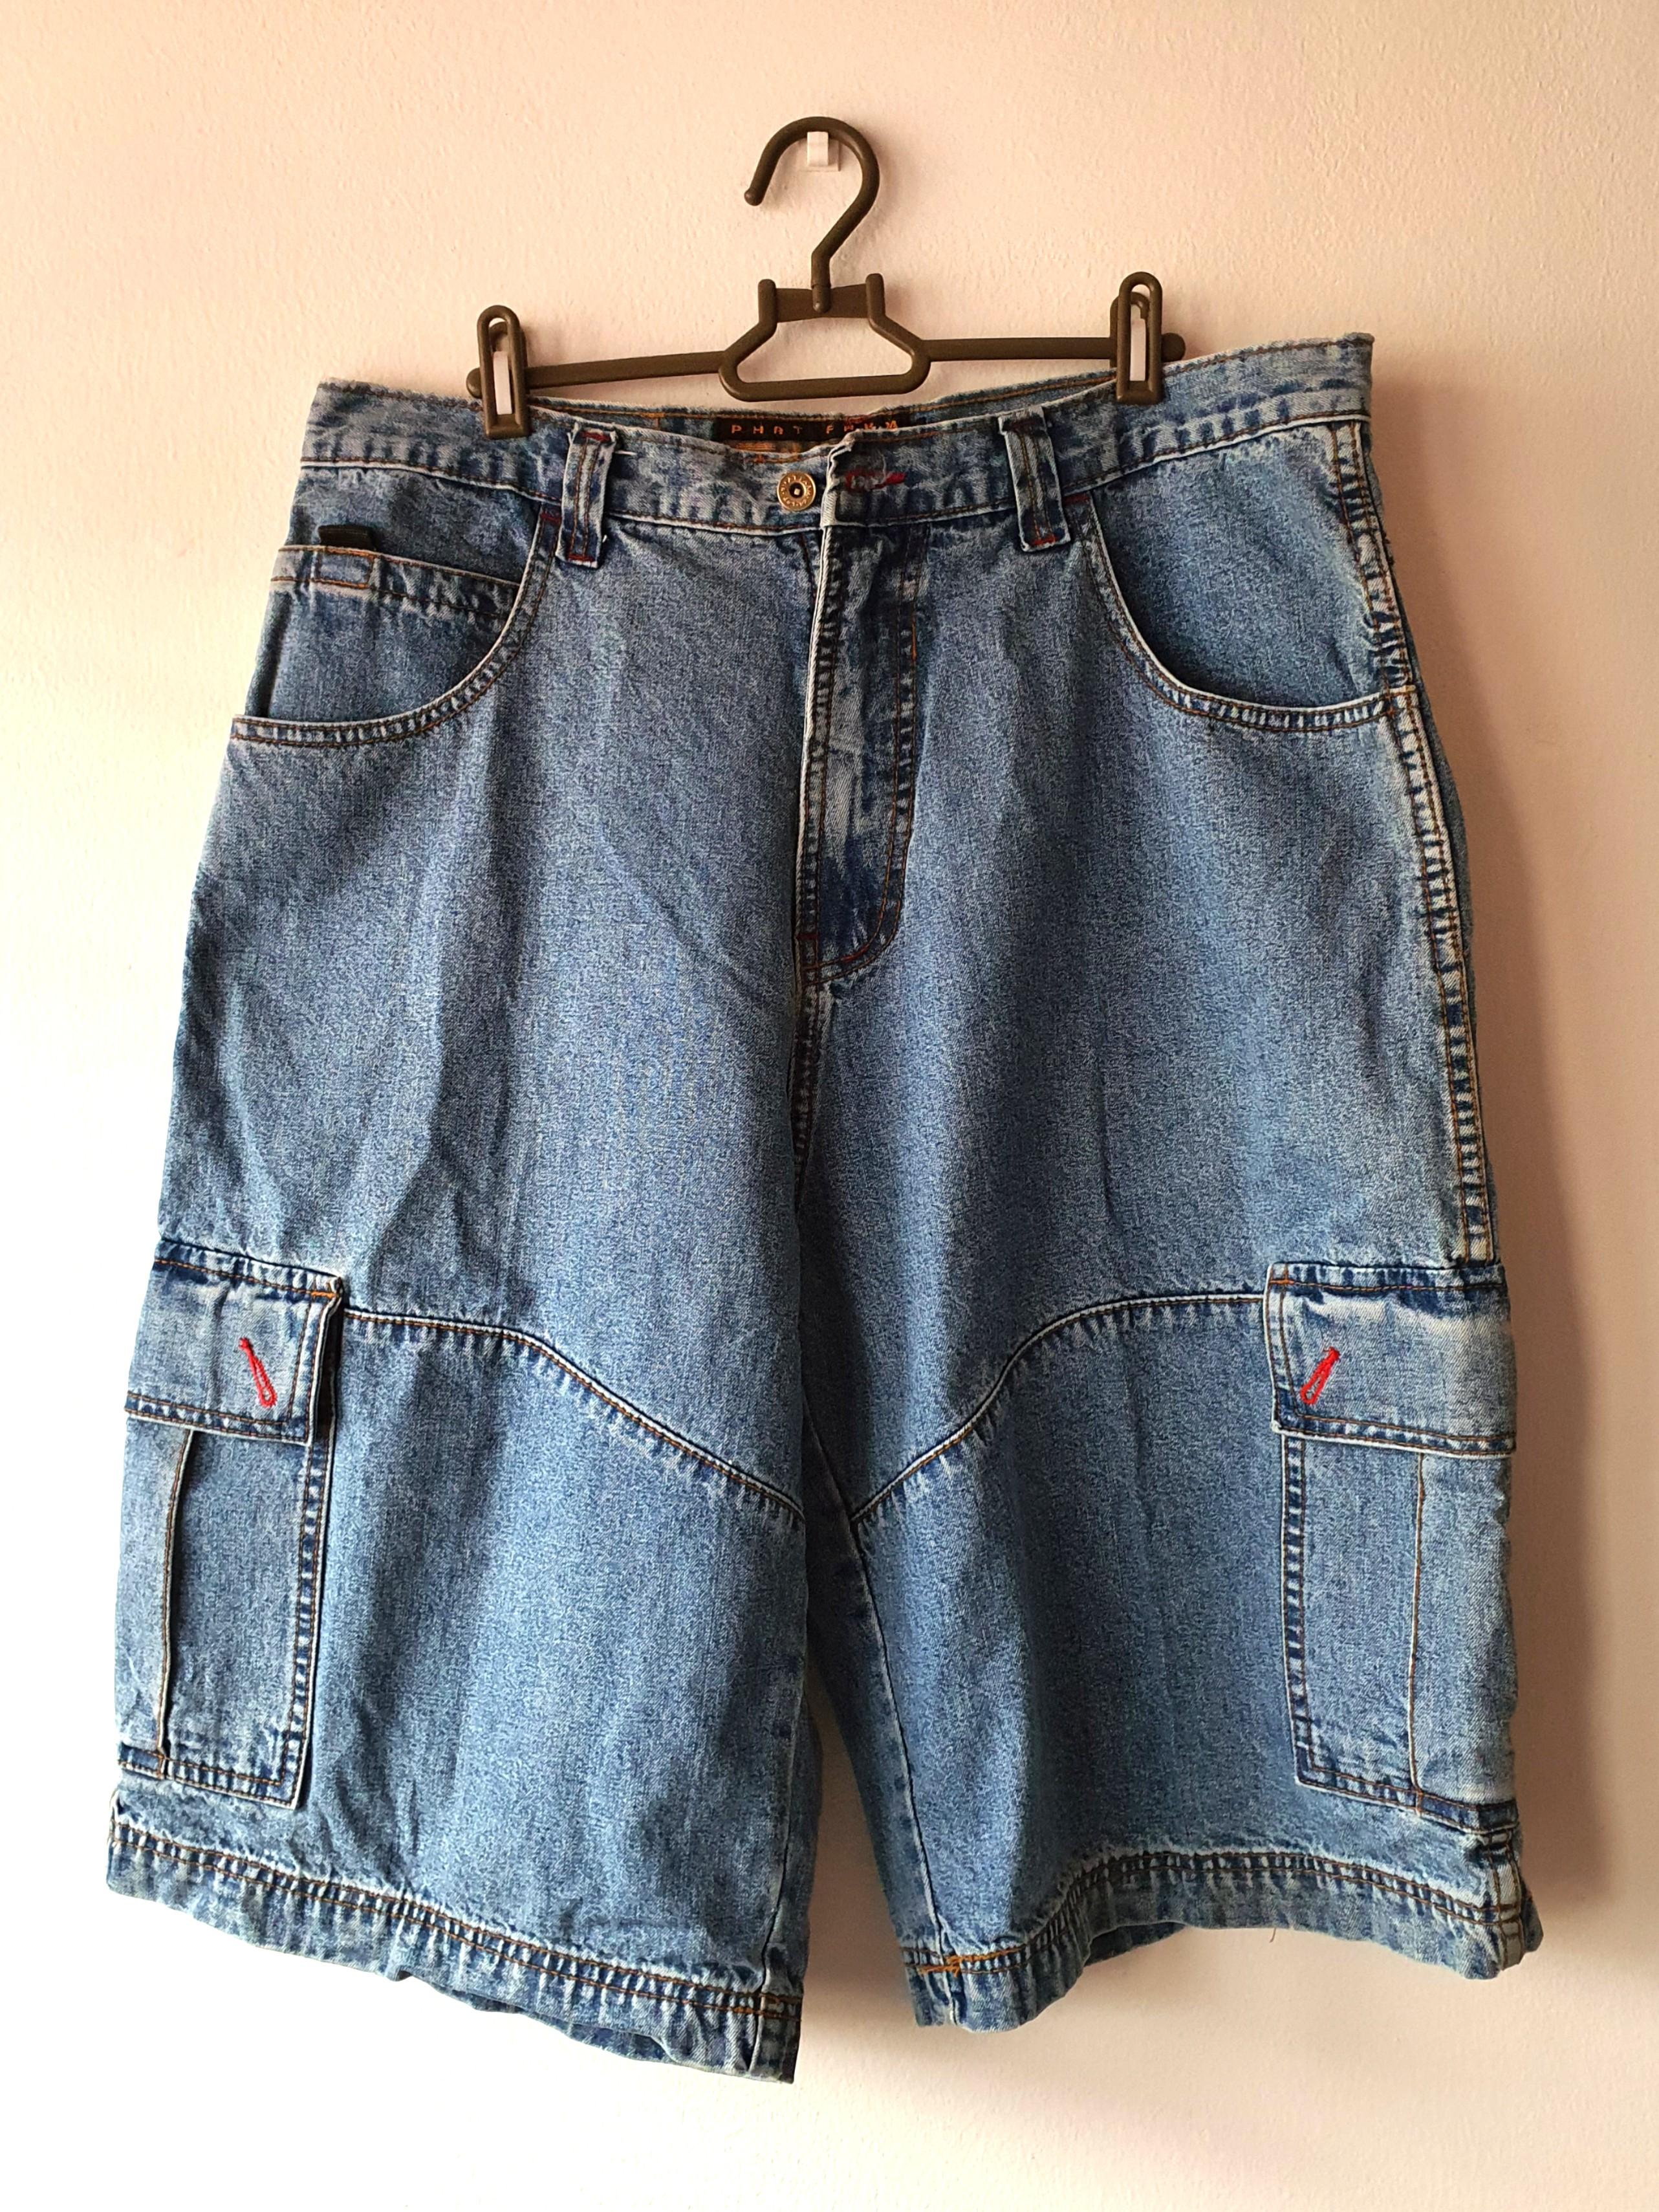 dell kelleher recommends phat farm jean shorts pic